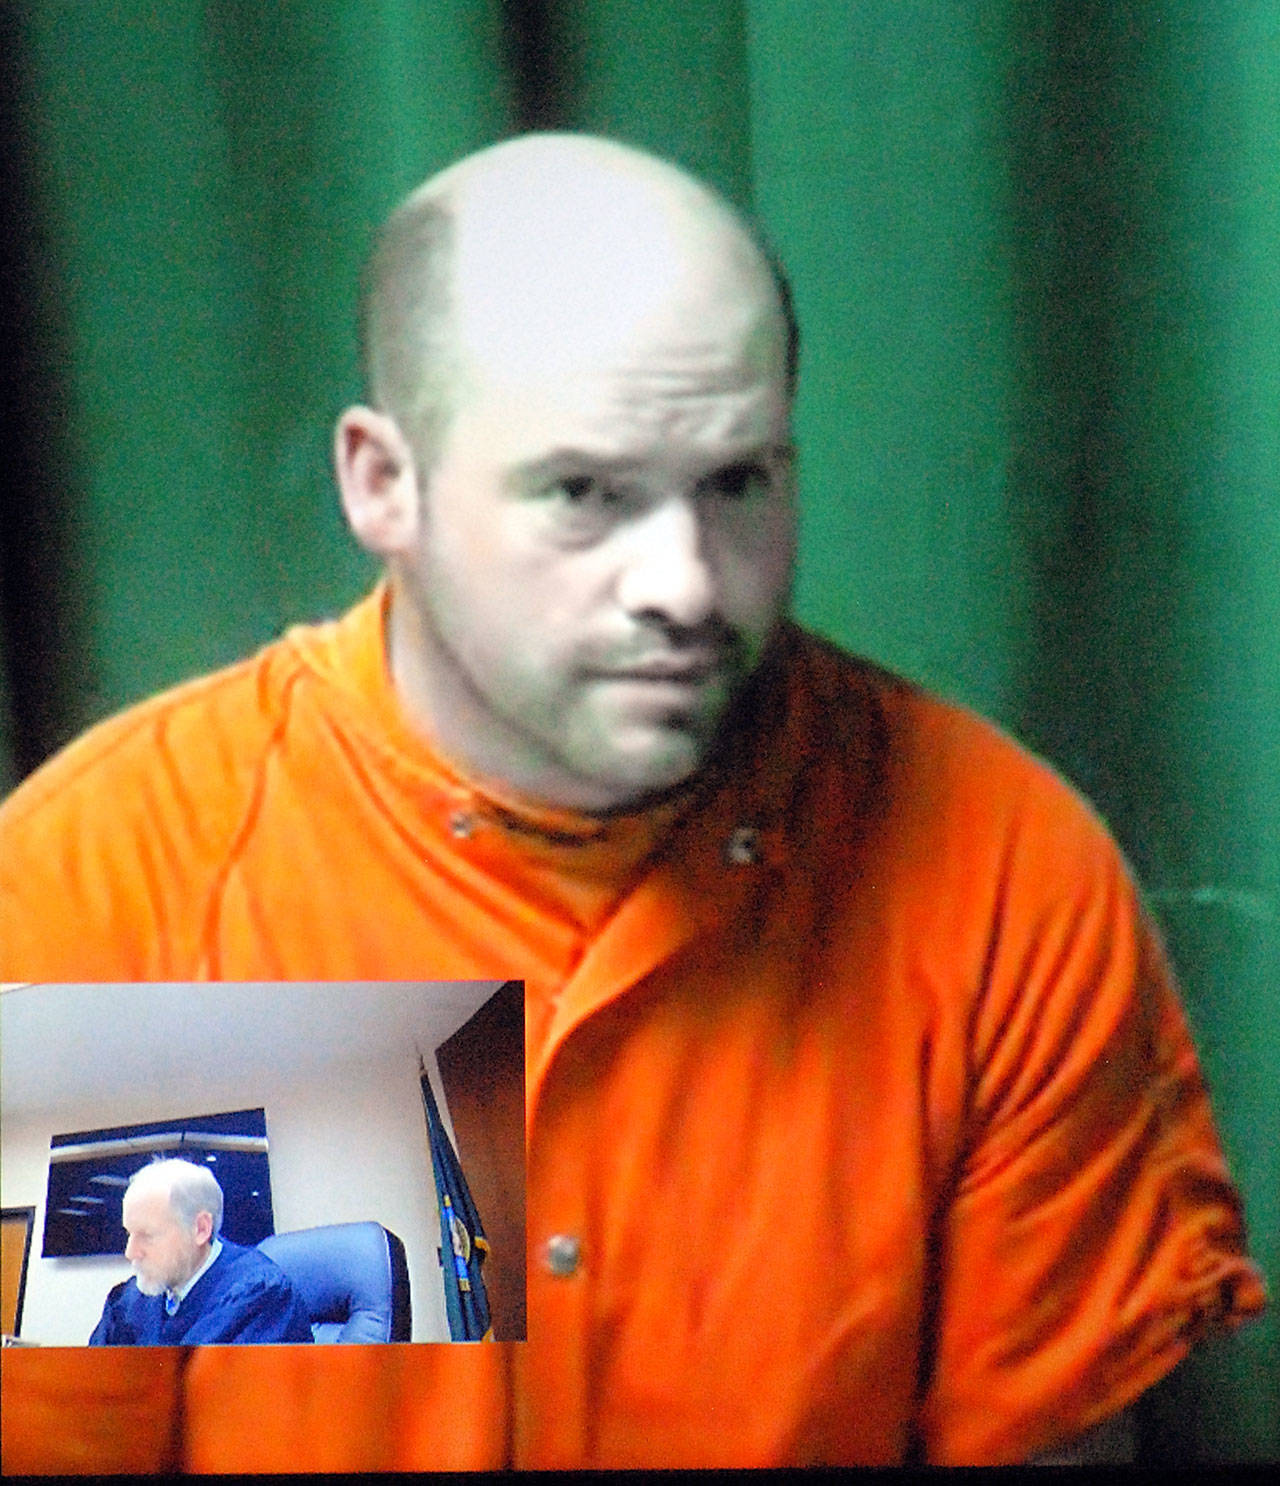 Ryan Warren Ward, 37, appears by video link during his first appearance in Clallam County Superior Court in Port Angeles on Thursday on charges of aggravated first-degree murder with firearms enhancements related to a triple homicide in December. Inset in the two-way video appearance is Superior Court Judge Brian Coughenour. (Keith Thorpe/Peninsula Daily News)